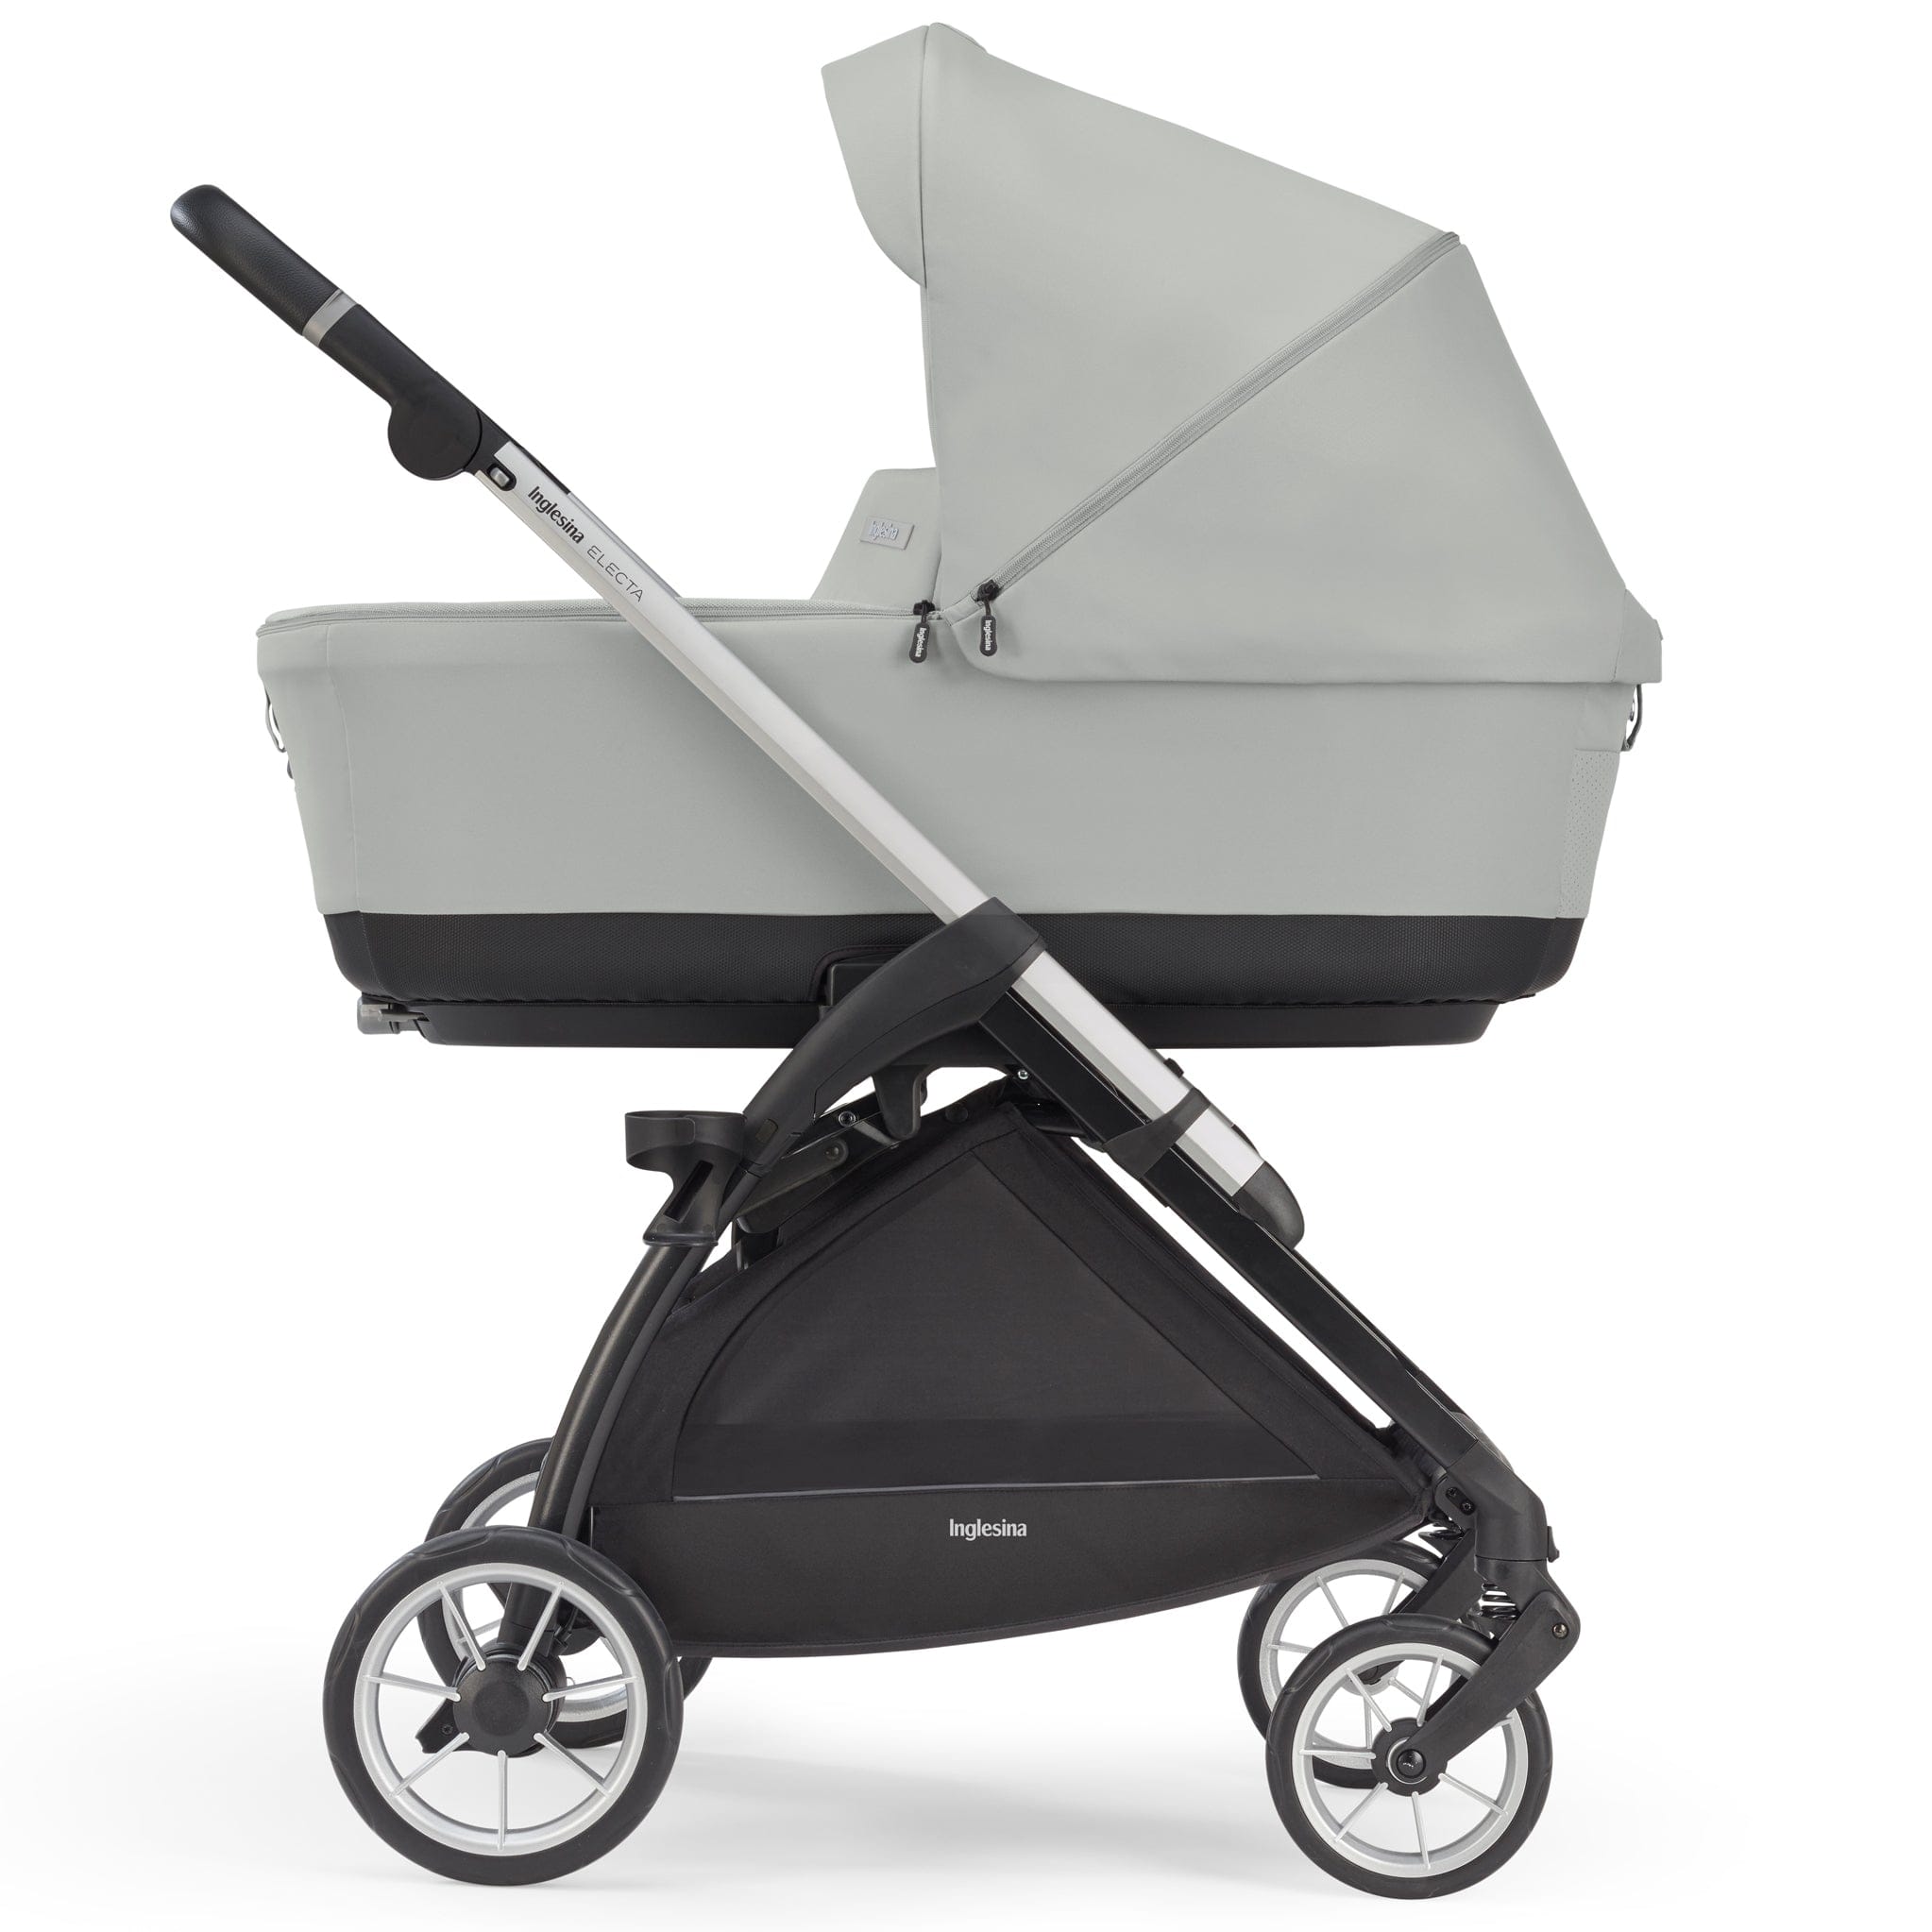 Inglesina travel systems Inglesina Electa System Quattro in Greenwich Silver with Darwin car seat and i-Size base ELC-GRE-SIL